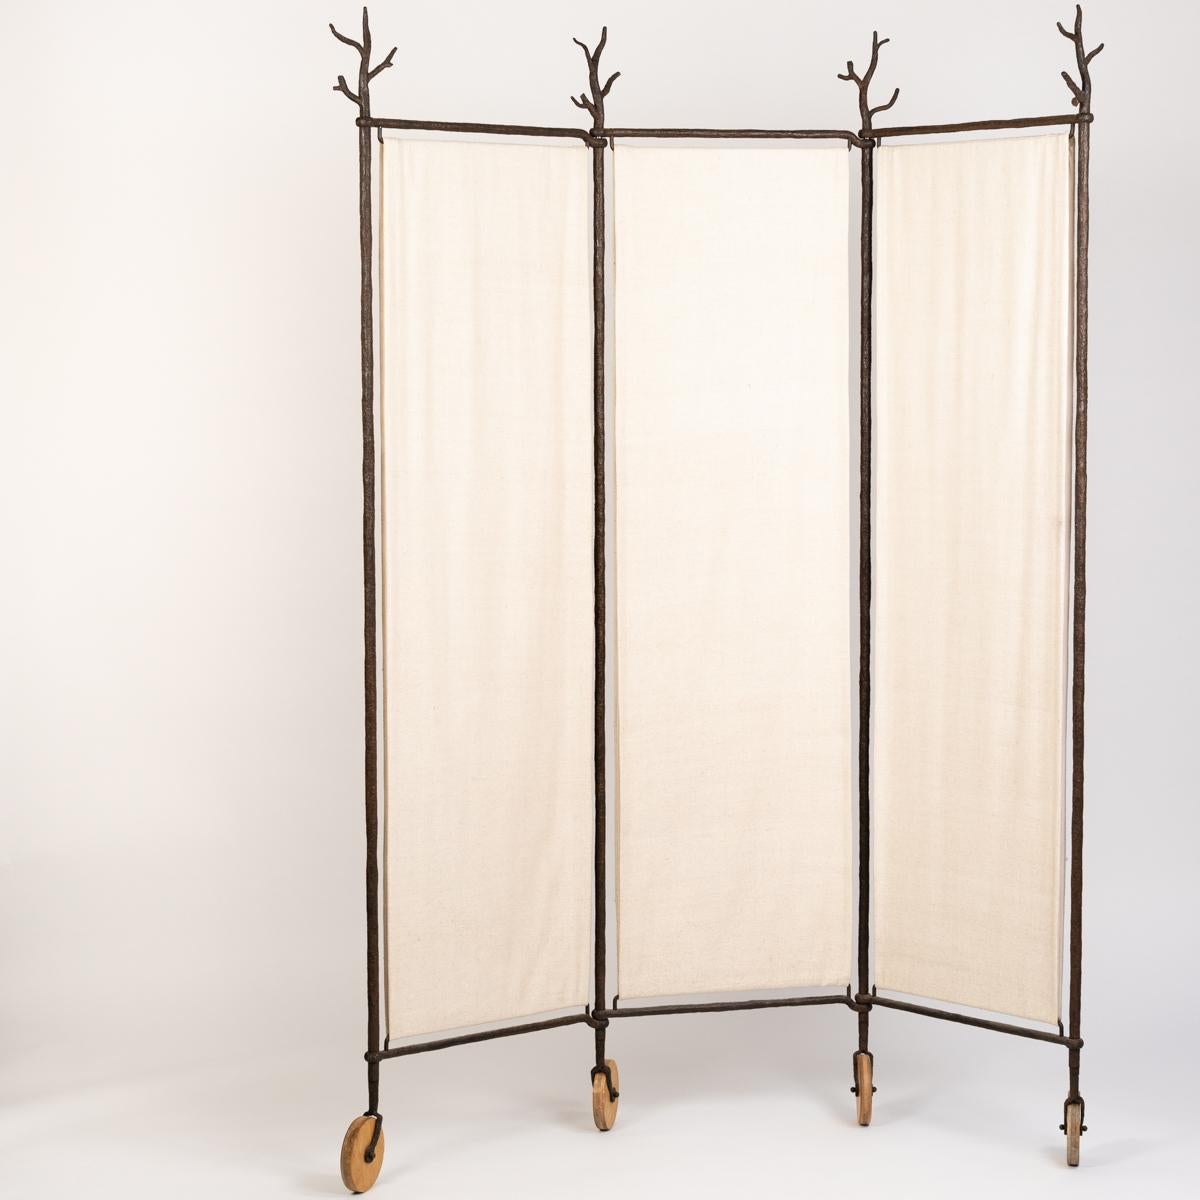 Screen in iron with heavy linen fabric covering by Stefan Herzog.
The naturalistic object has a poetic touch and recalls the works of Garouste and Bonetti.
The iron parts have a certain rusticity, the pores are open, making them look almost like